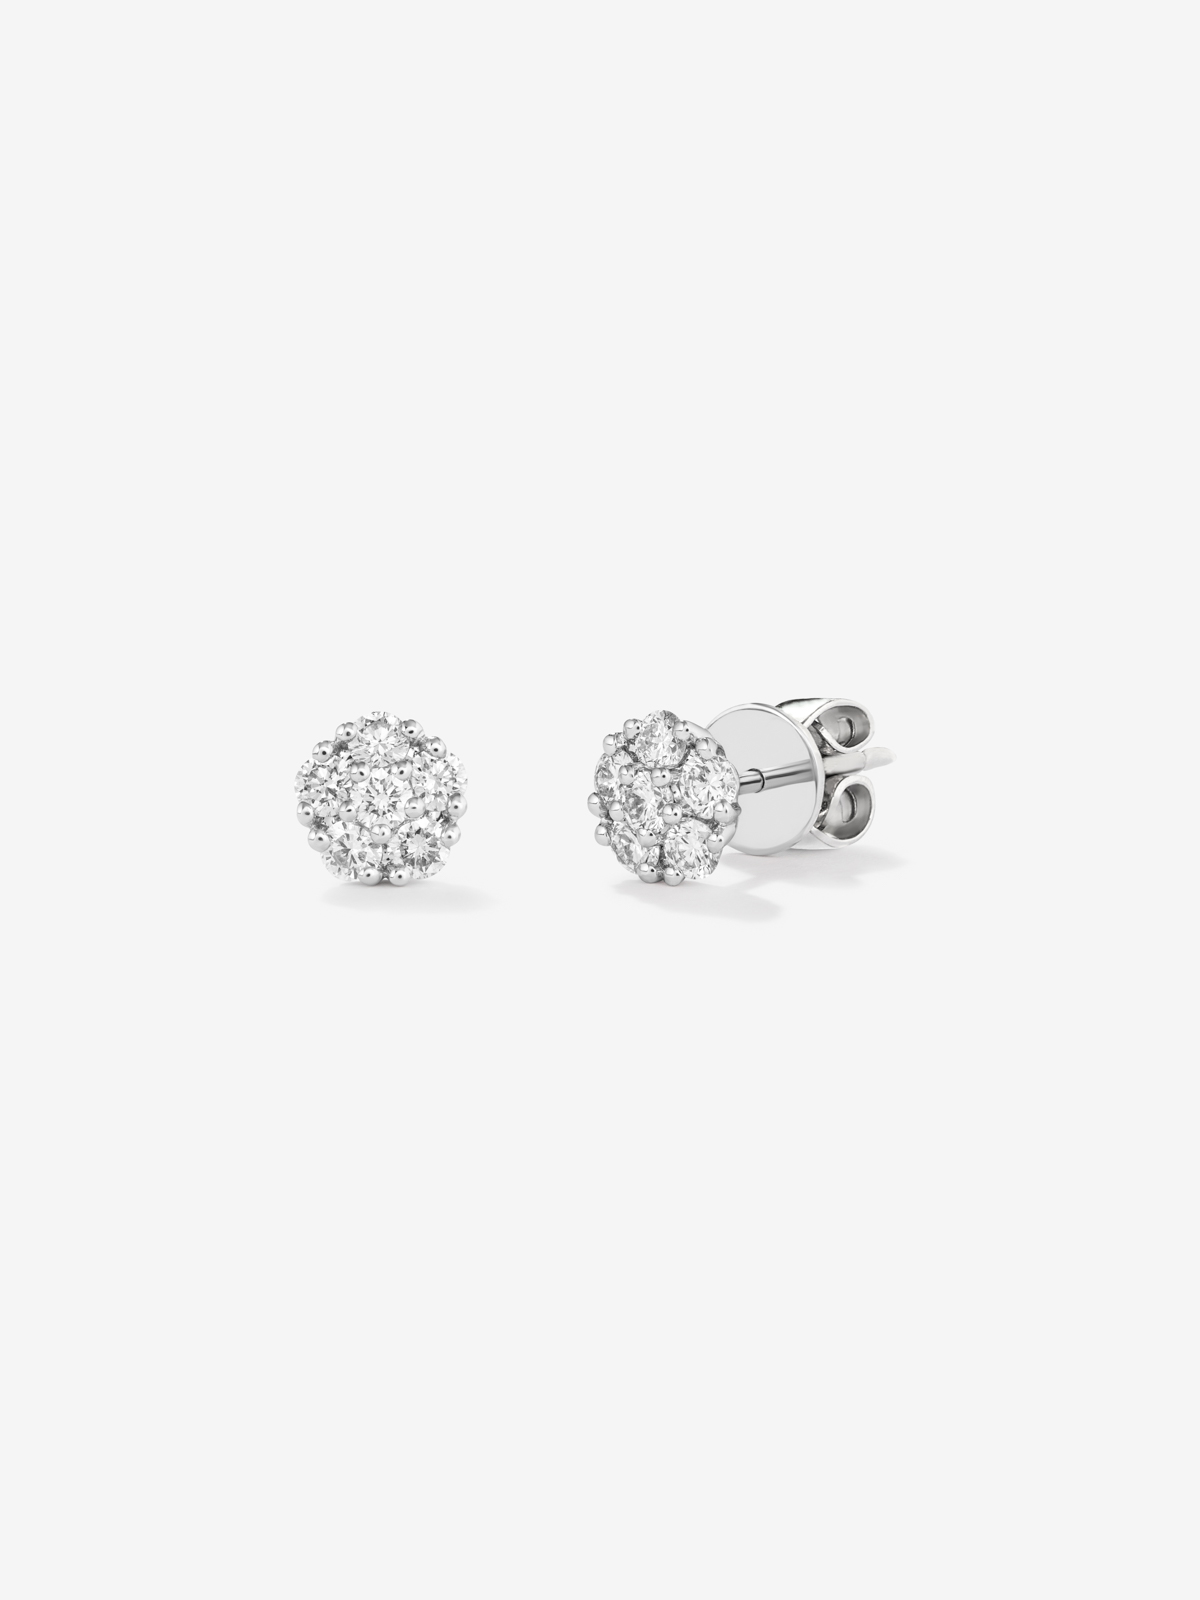 Grace white gold earrings with diamond